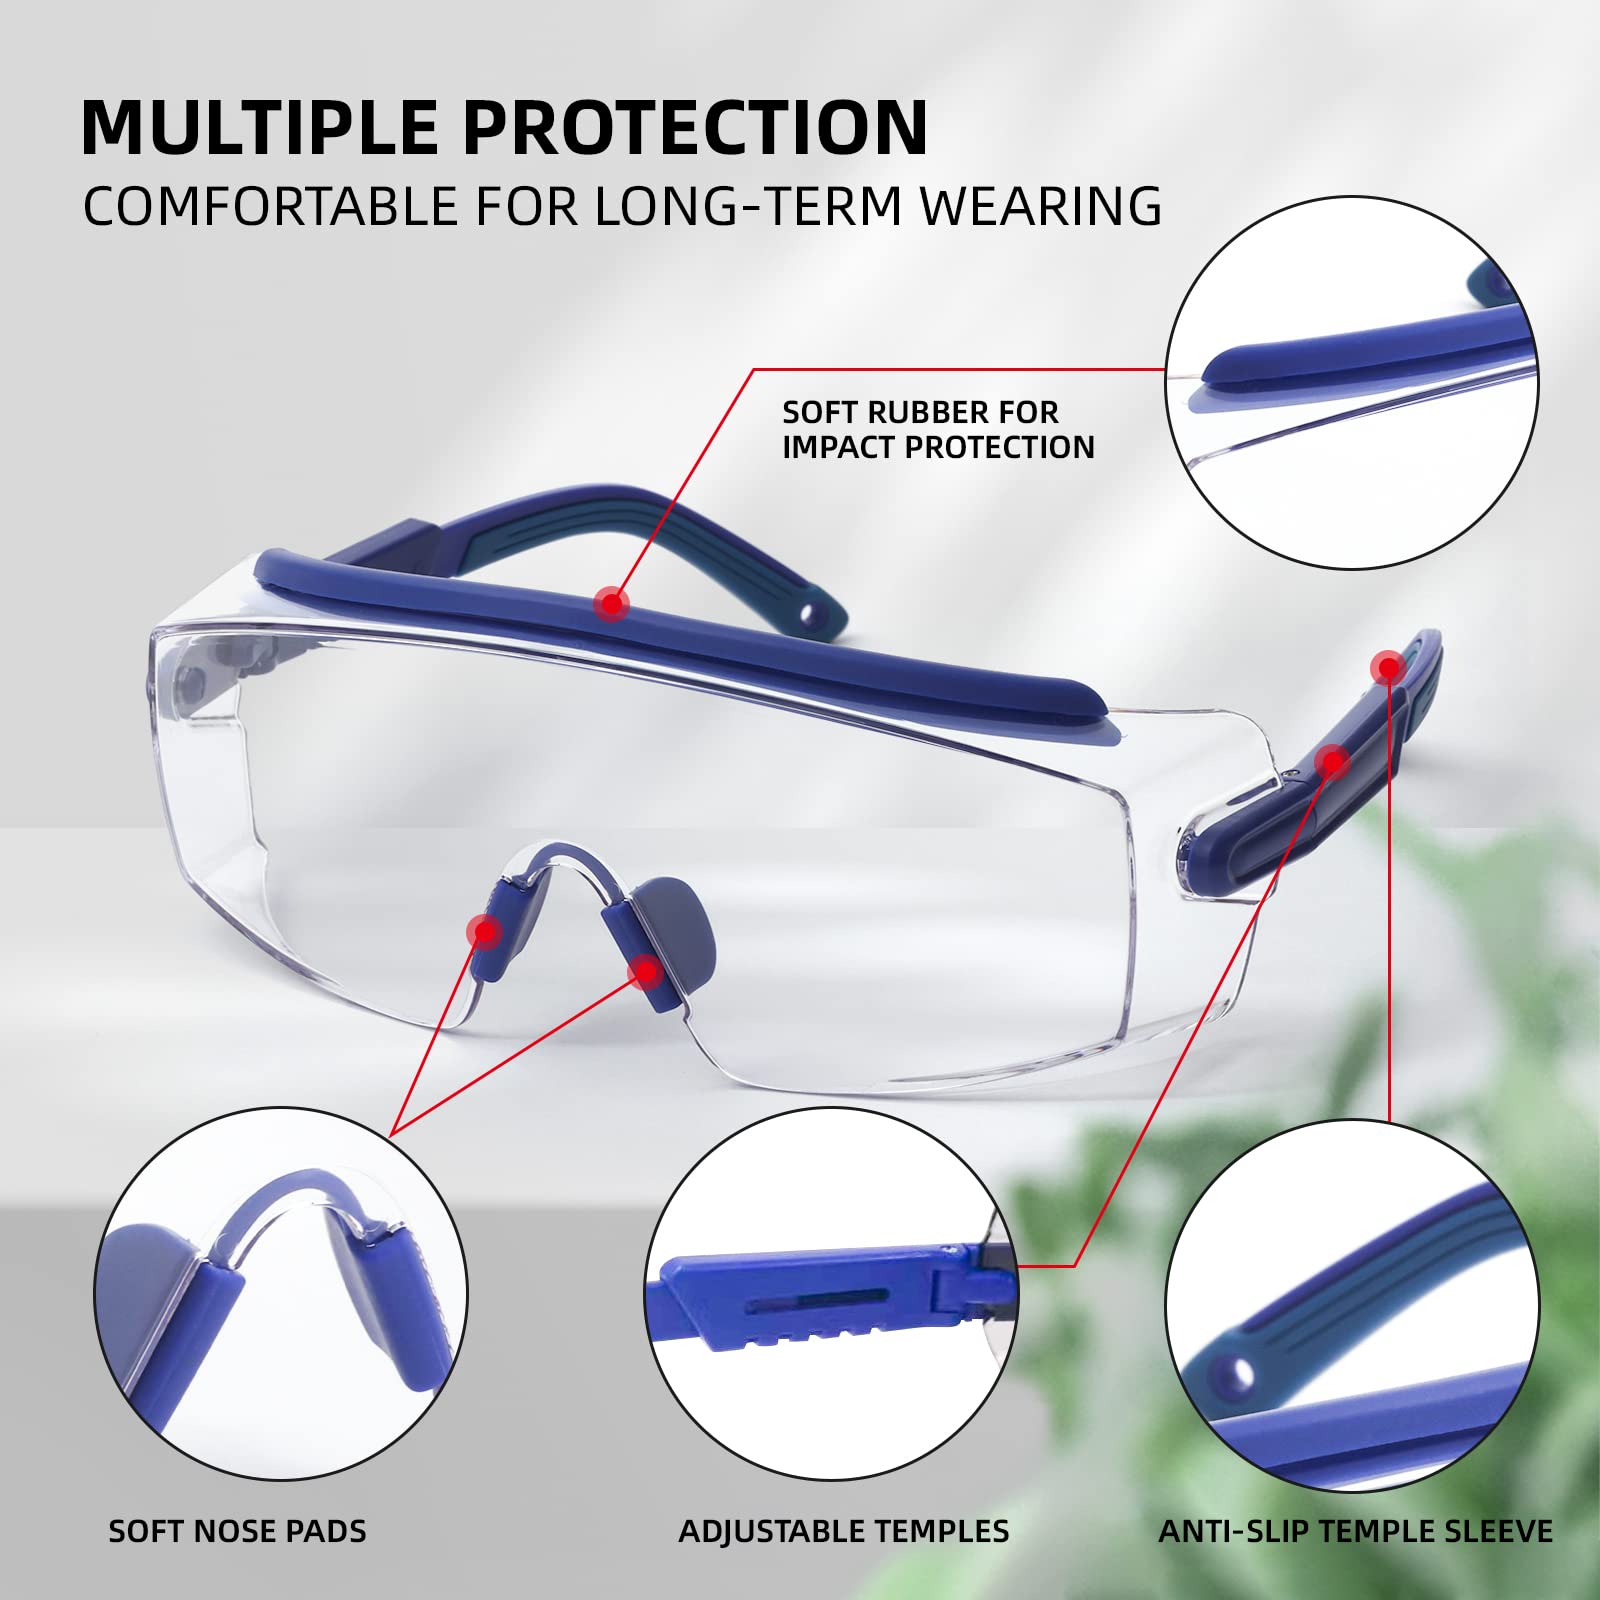 Optical Care Safety Glasses Anti Fog Safety Goggles Over Glasses Protective Eyewear with Clear Wrap-around Lens, Adjustable, Impact Resistance and Anti-dust